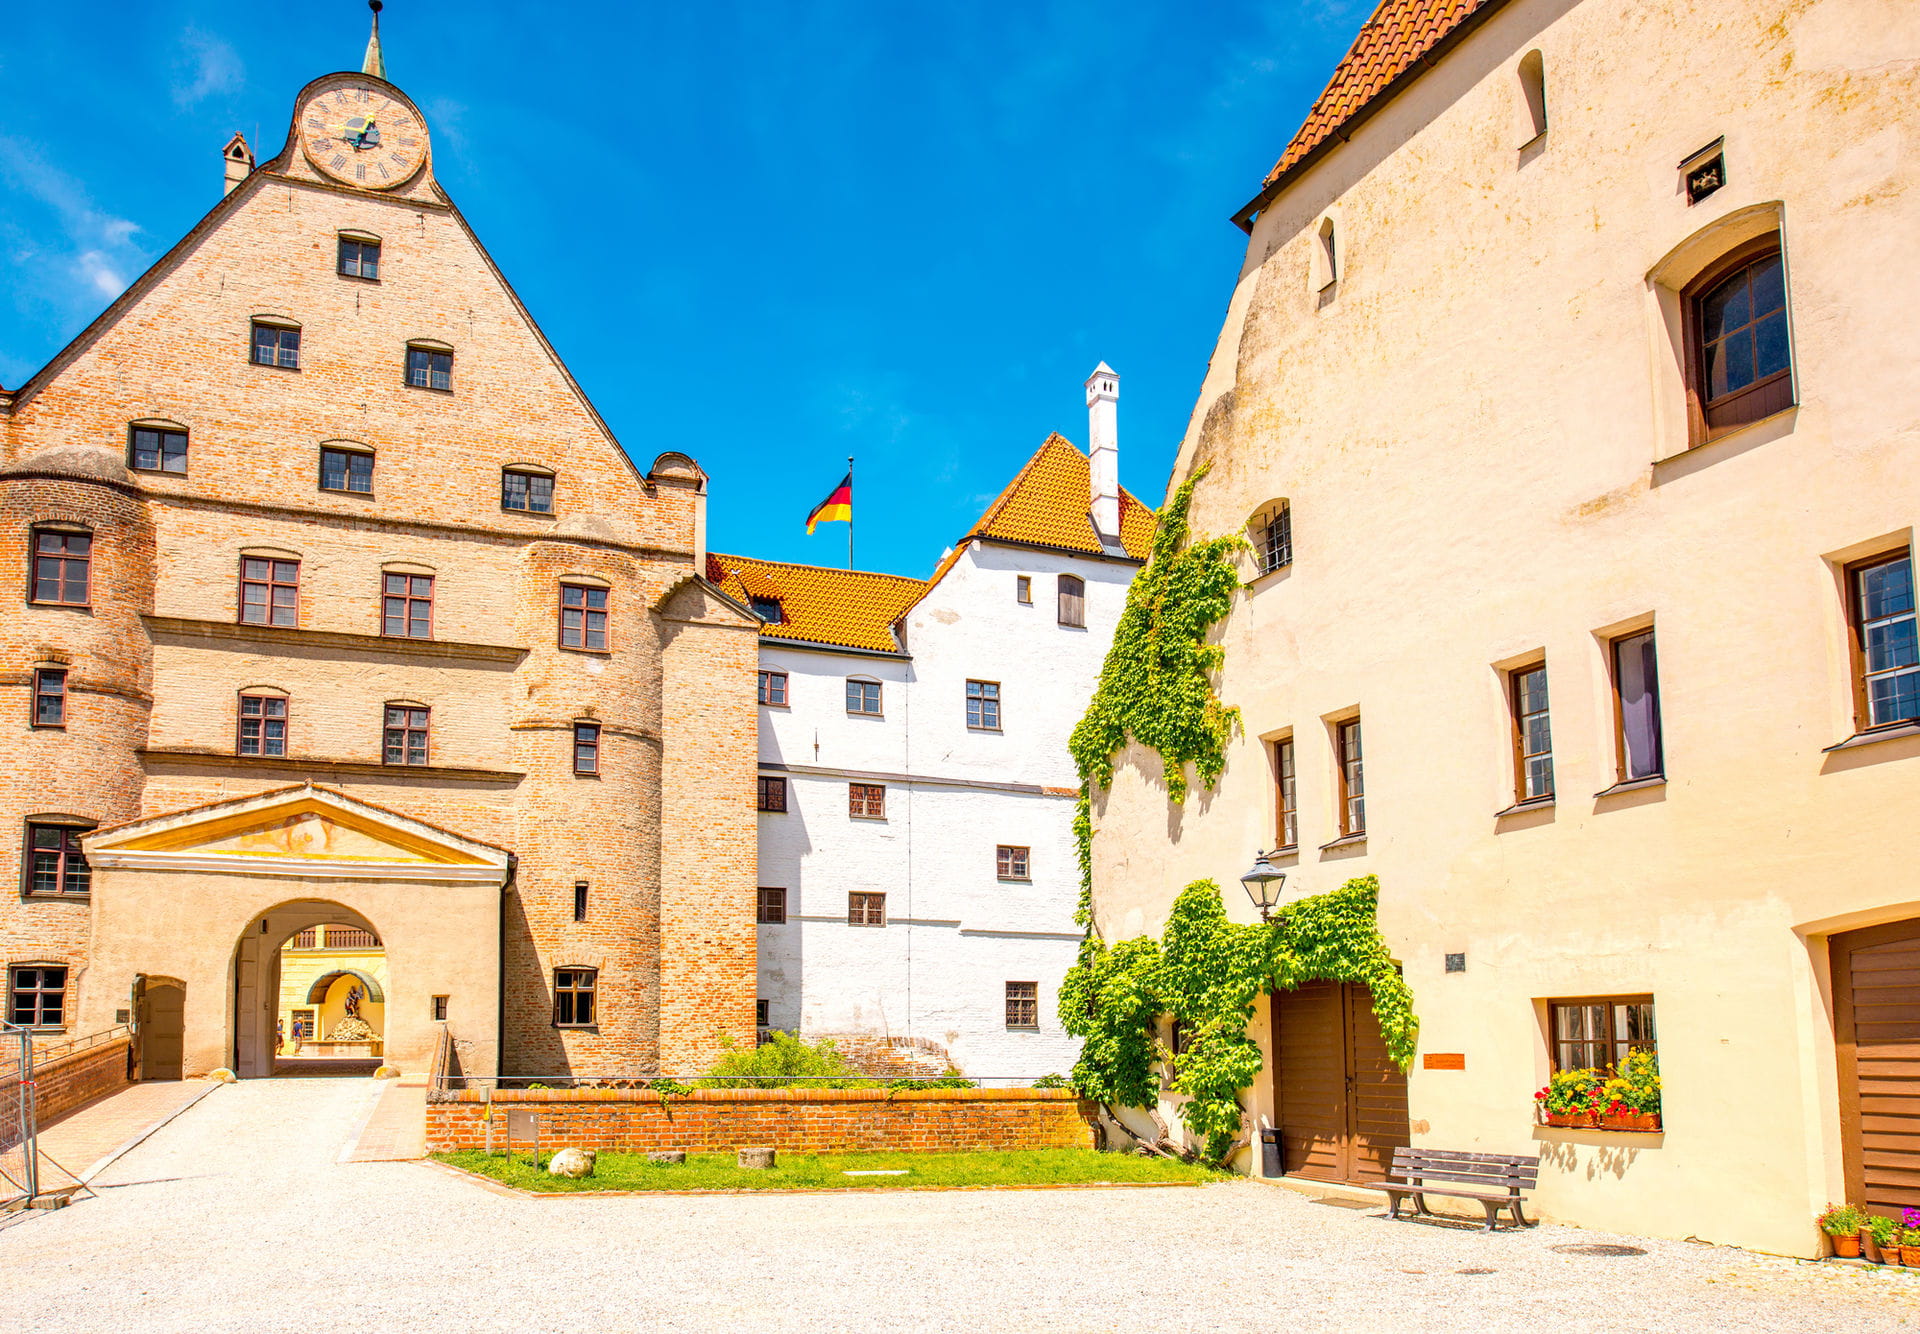 High quality hoto of Trausnitz Castle - Germany